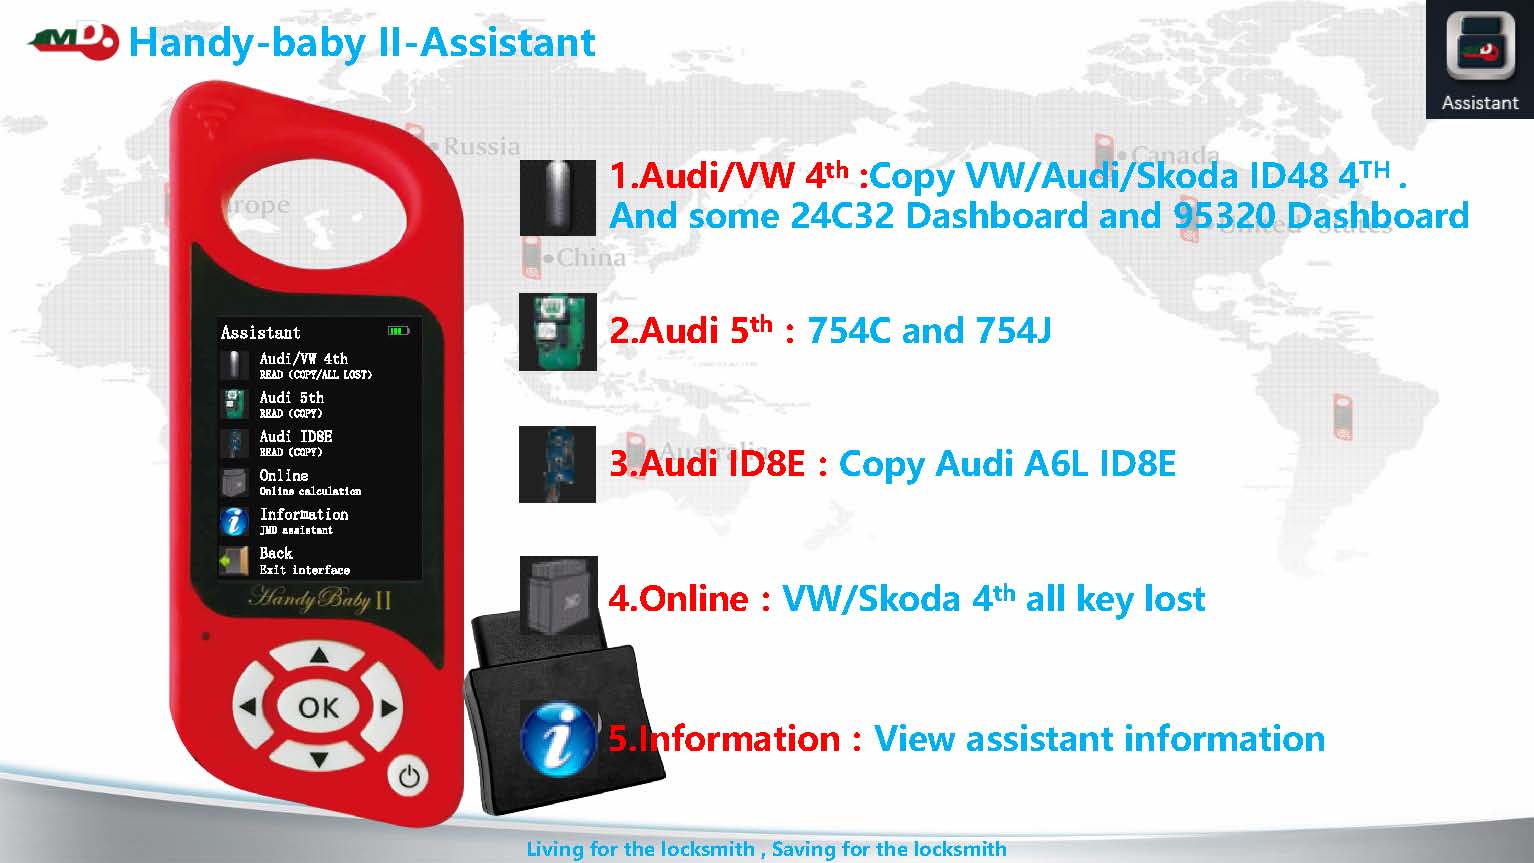 jmd-handy-baby-2-and -jmd-assistant-guide-001